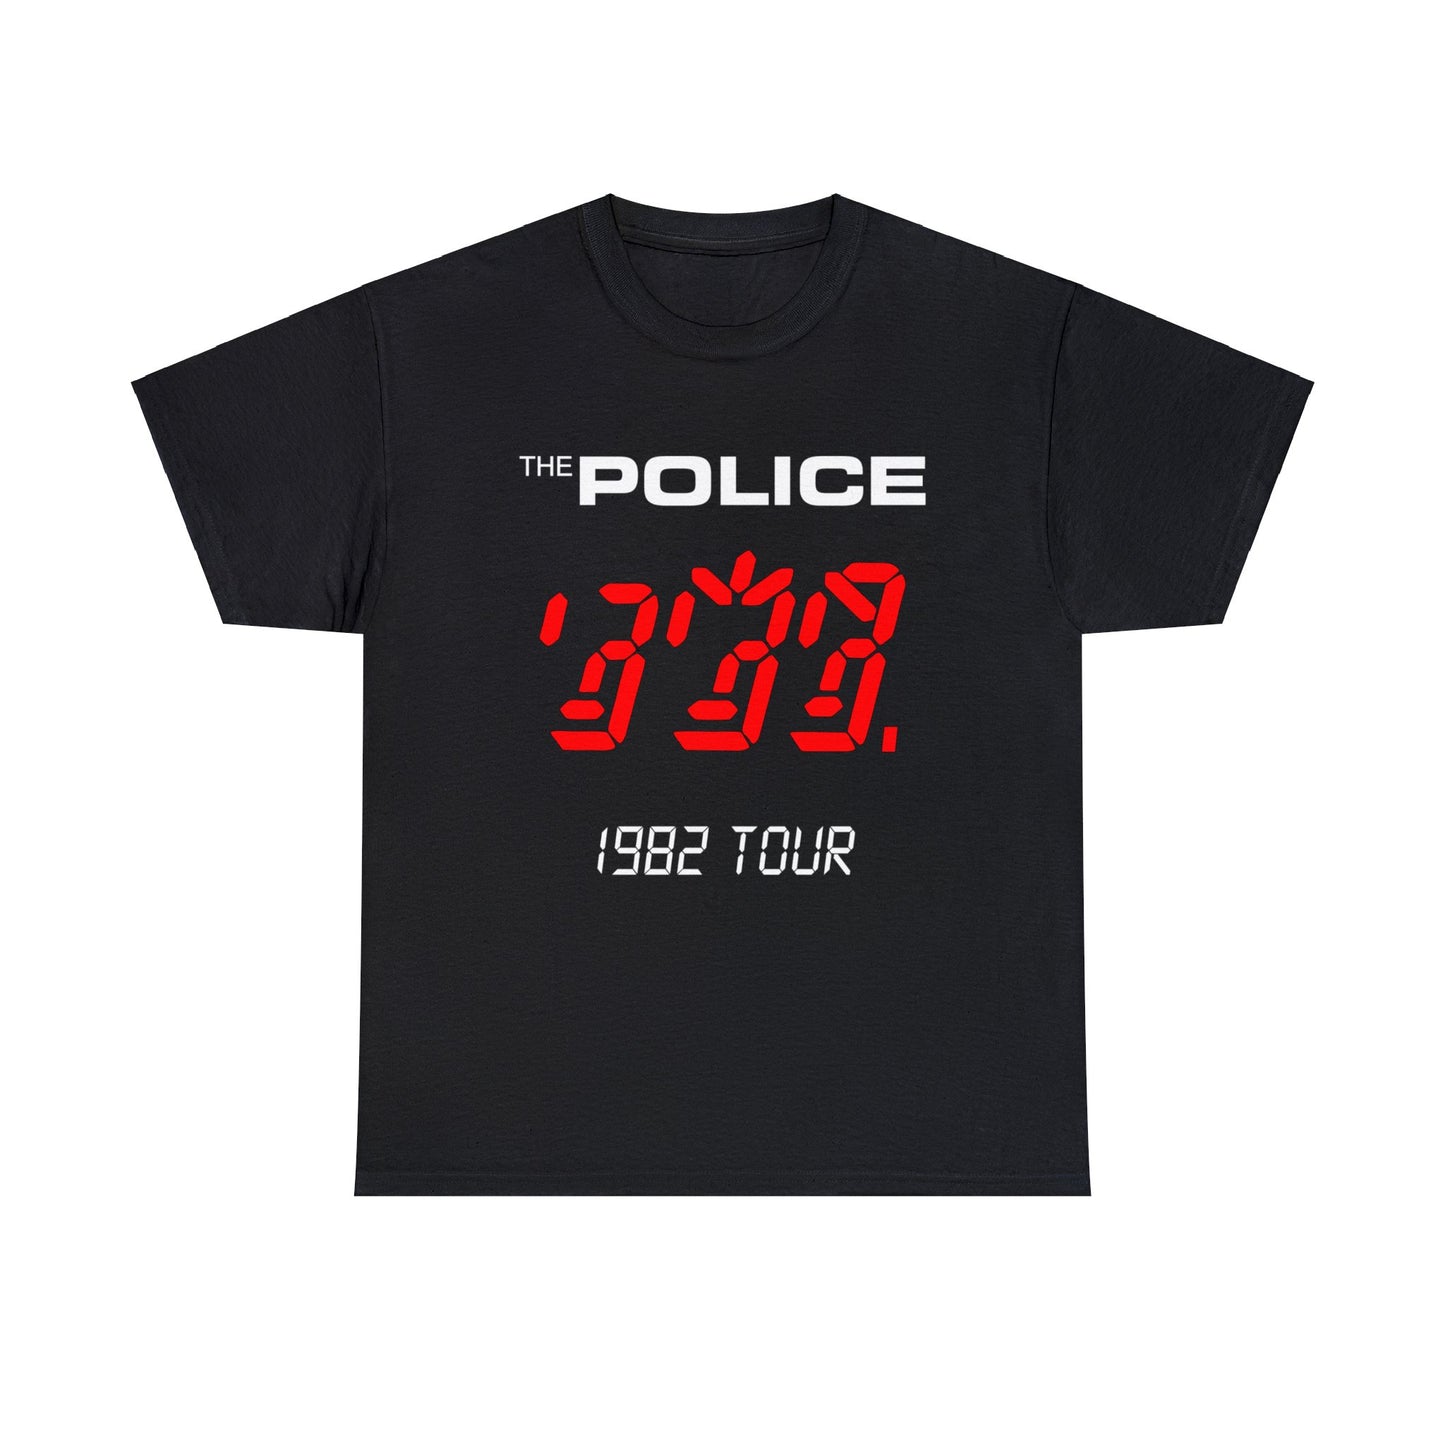 The police Ghost In The Machine Tour 1982